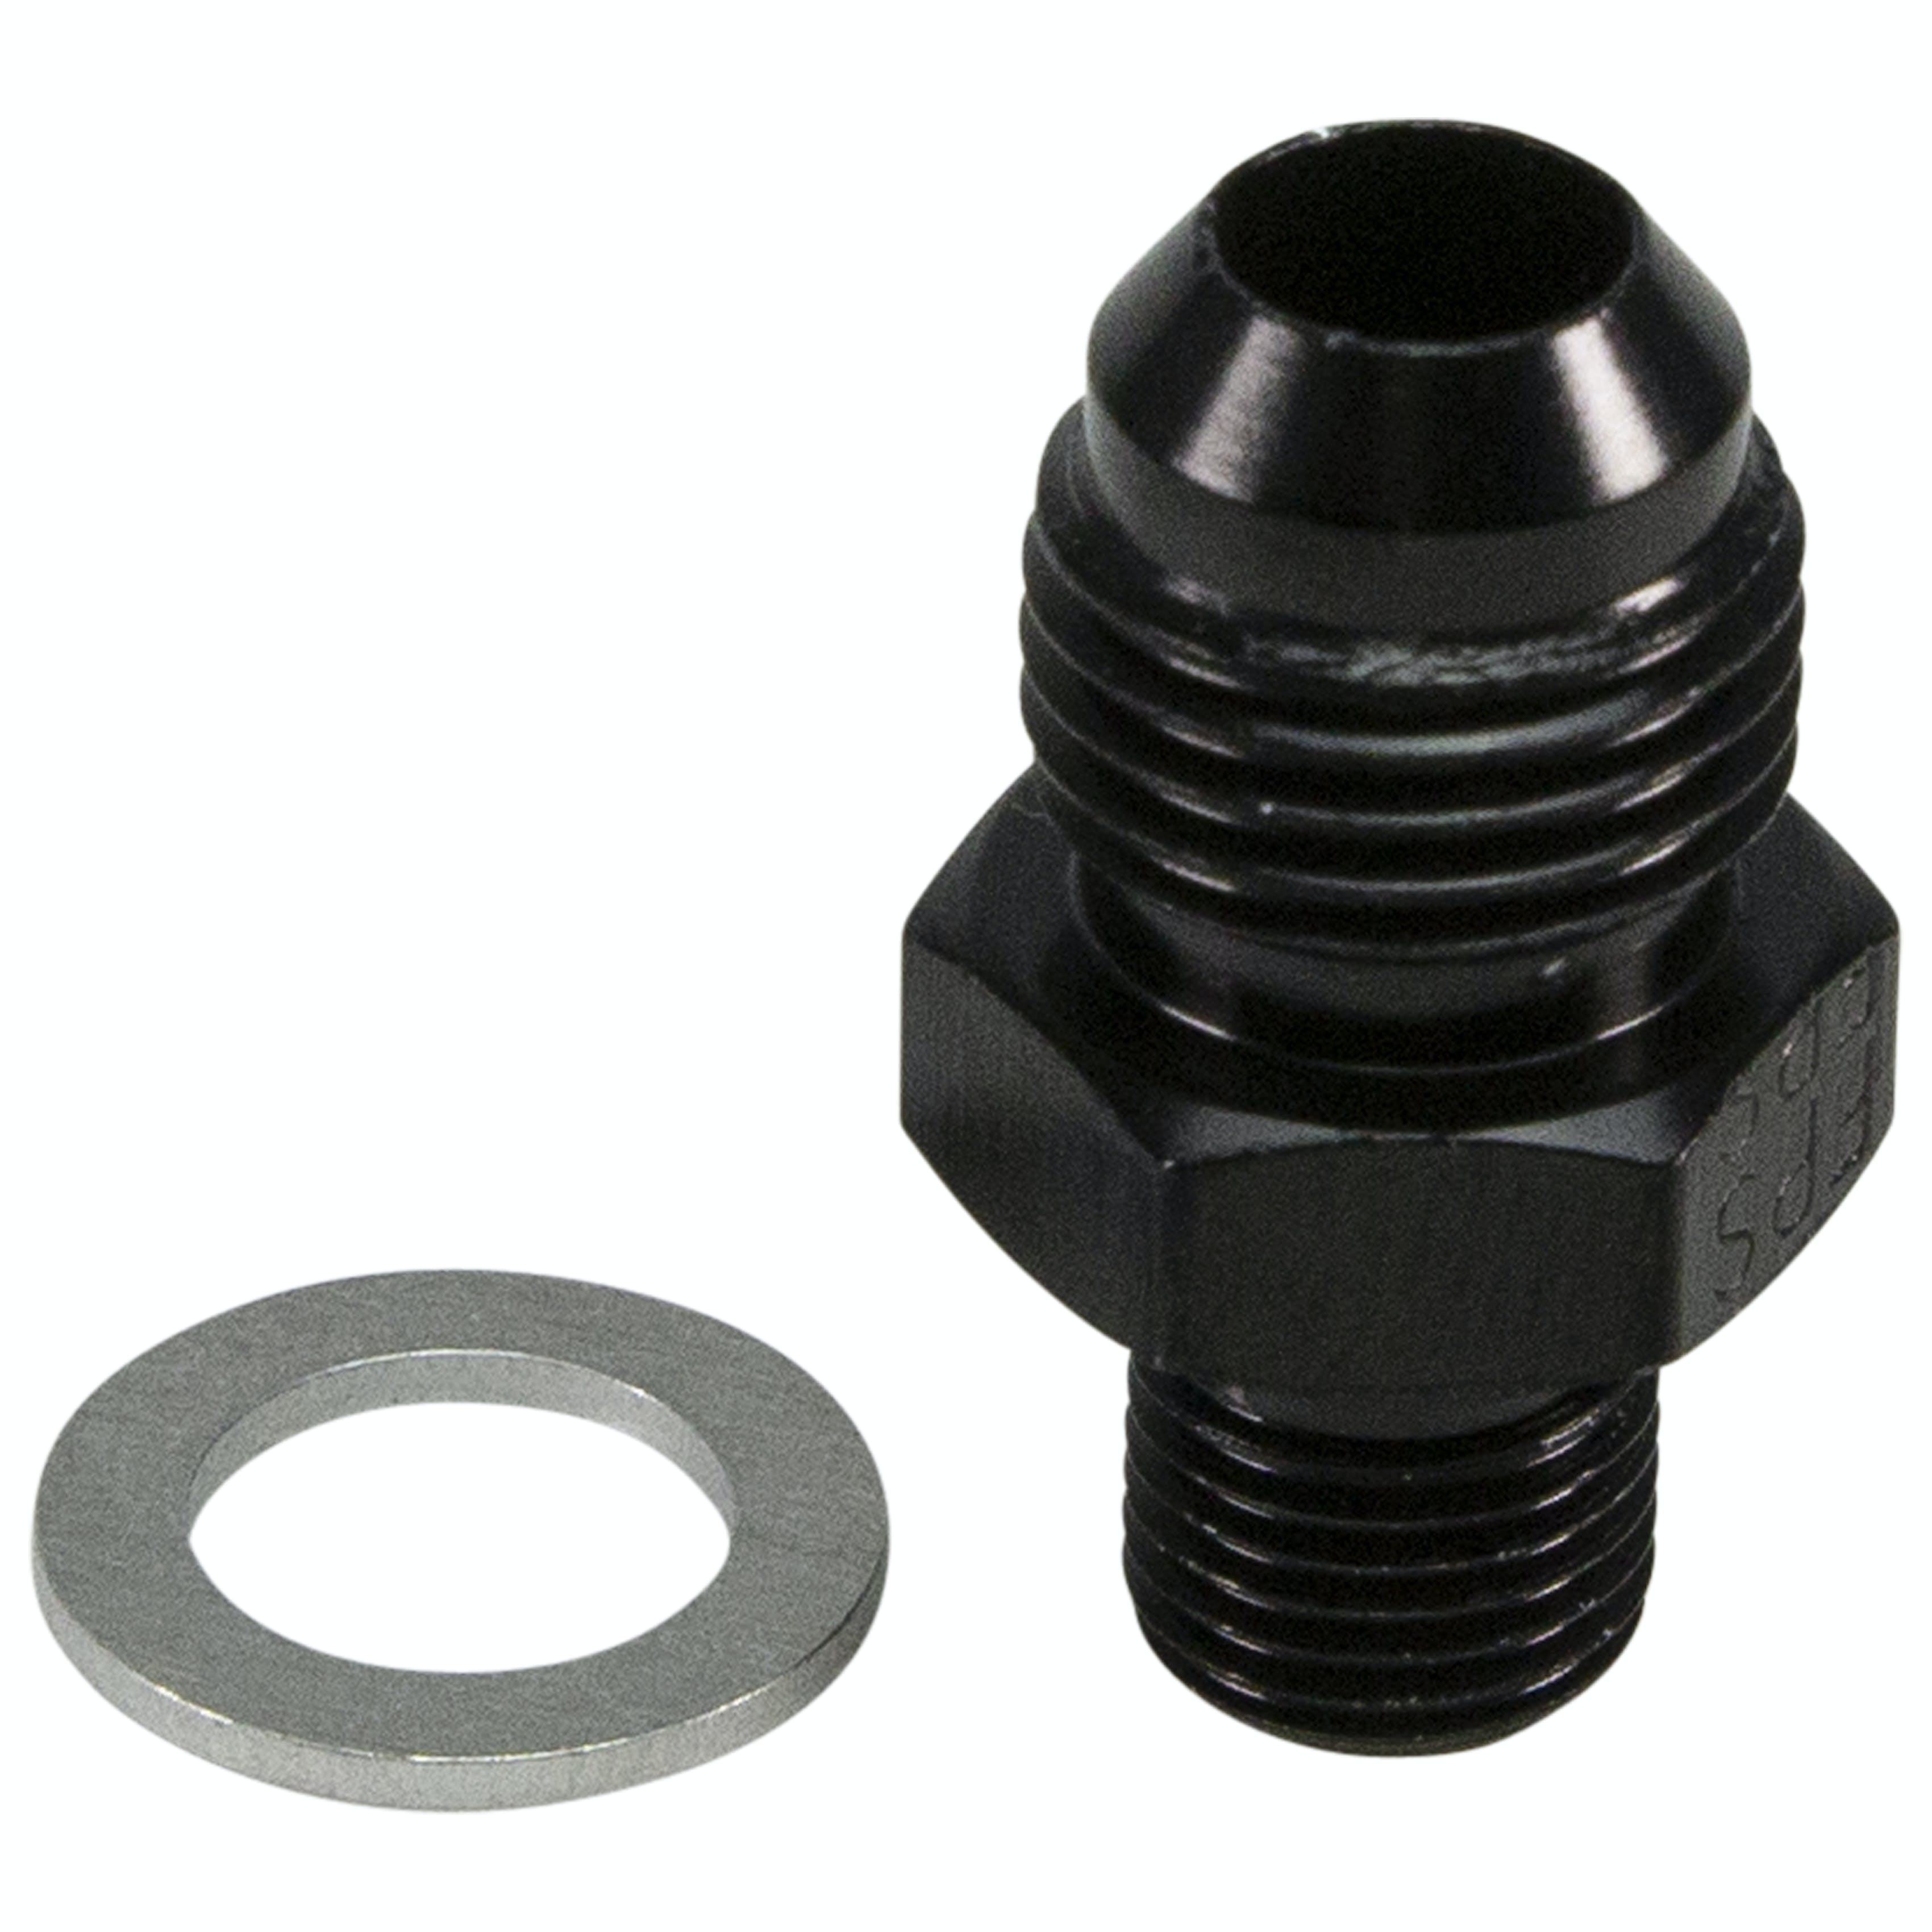 FAST - Fuel Air Spark Technology 30250 Fitting, #6 Male X 10Mm X 1.0 Thread Blk